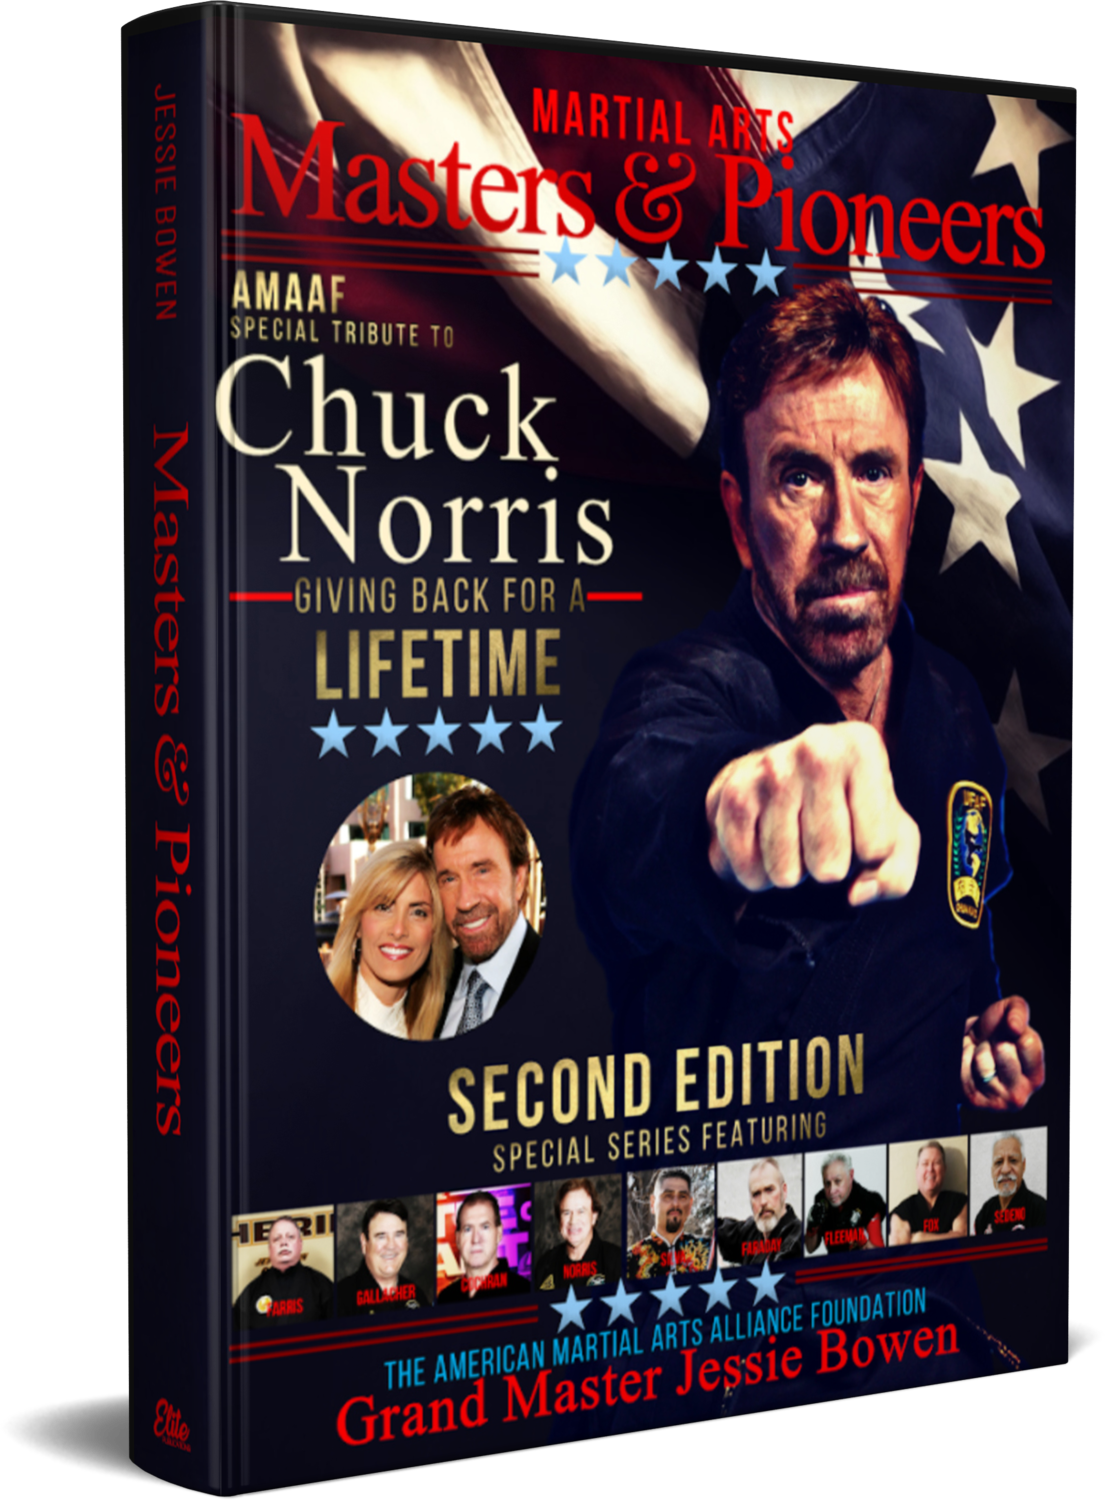 Martial Arts Masters & Pioneers Biography: Chuck Norris - Giving Back For A Lifetime Second Edition & FREE Public Speaking for Martial Artist Book